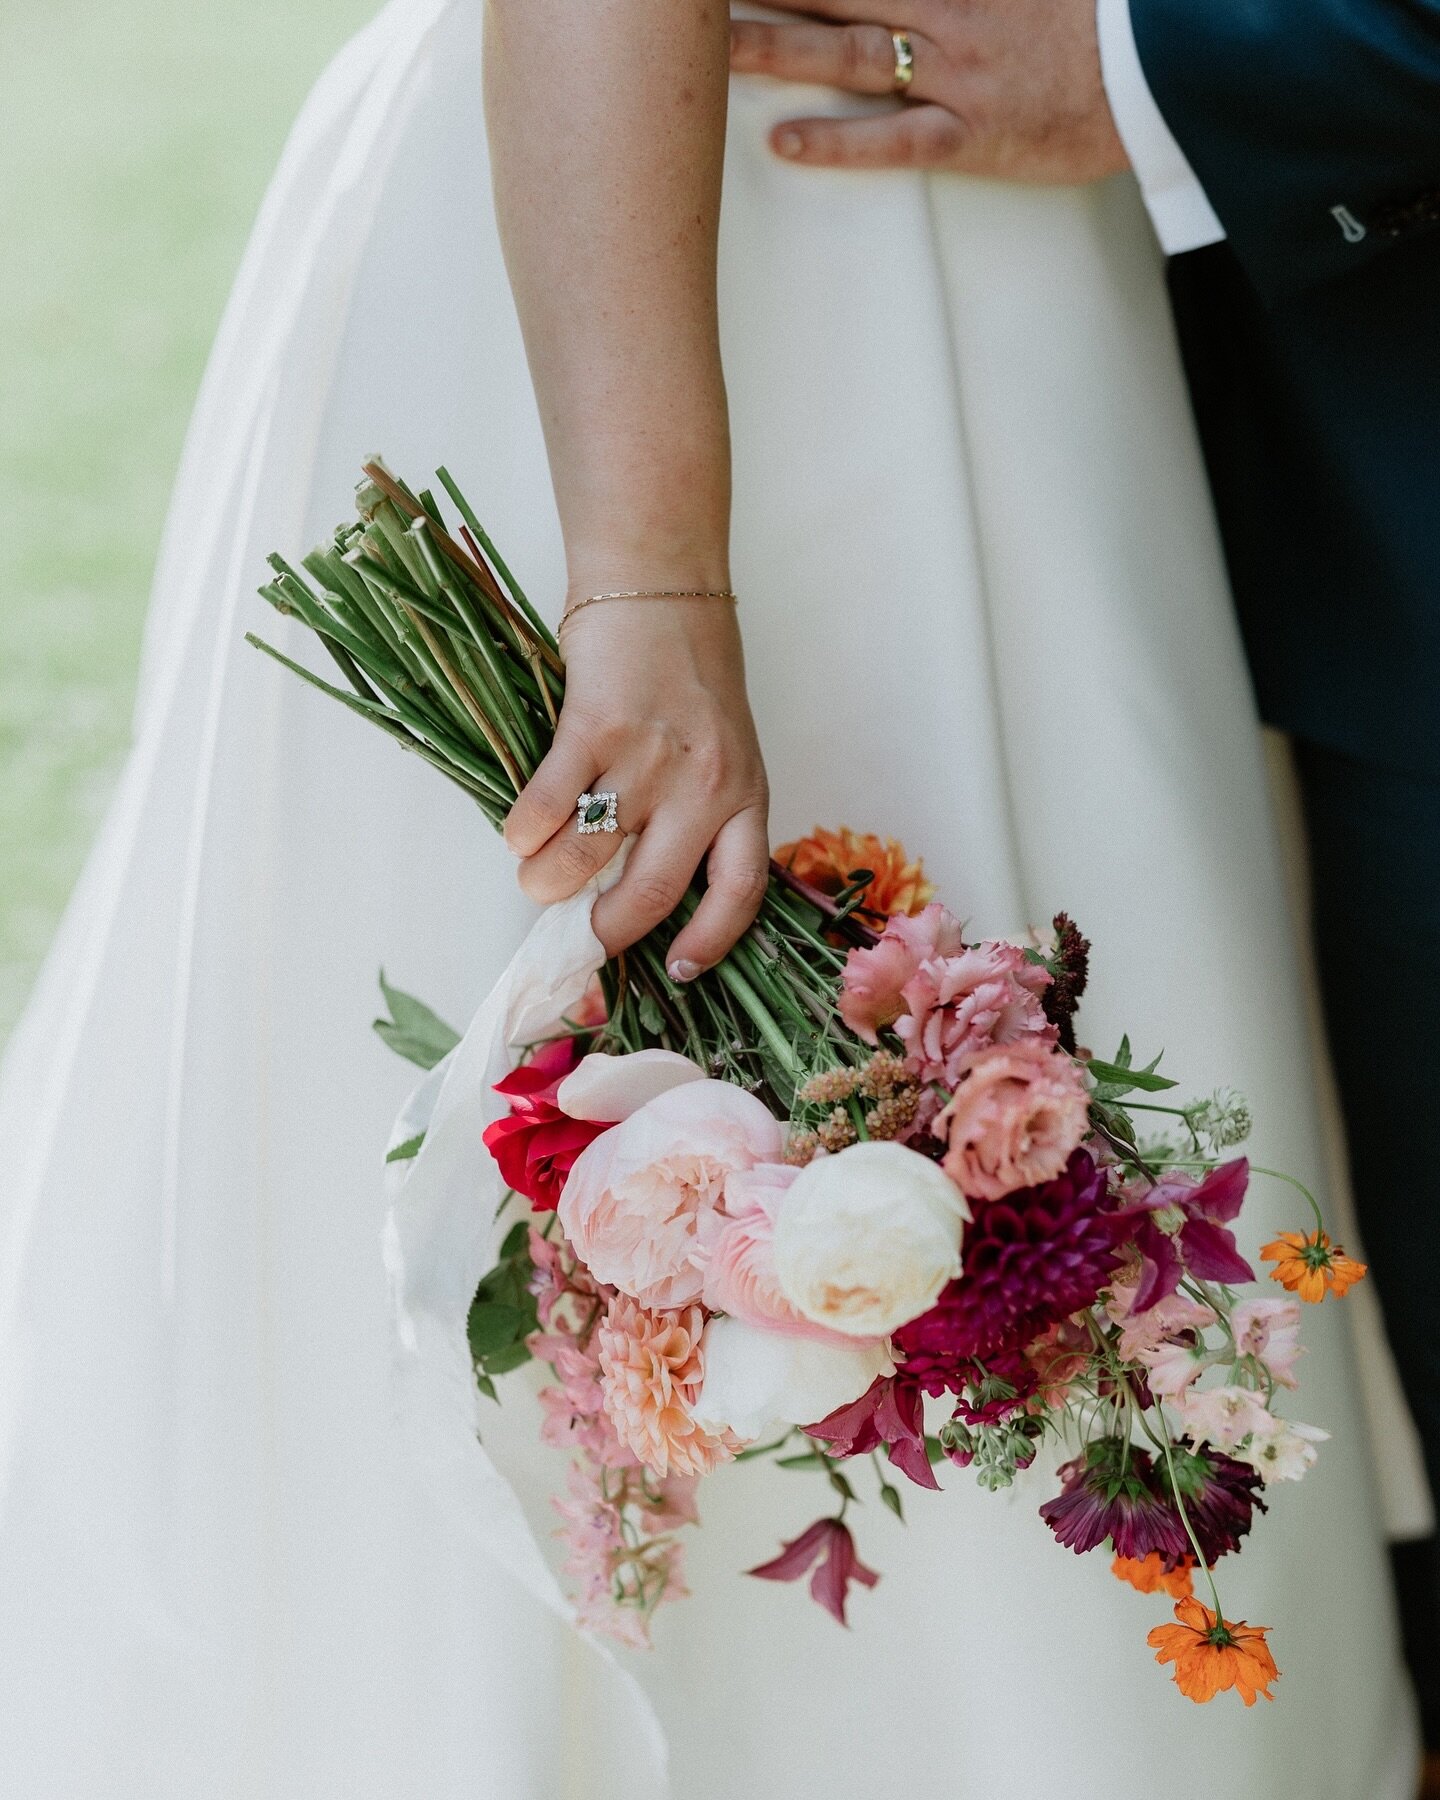 Our style? Capturing authentic moments and love stories with a modern stylistic twist. Giving you storytelling galleries that capture the emotion of the day and embrace timeless romance🤍

We love the small details, and creating an experience for our